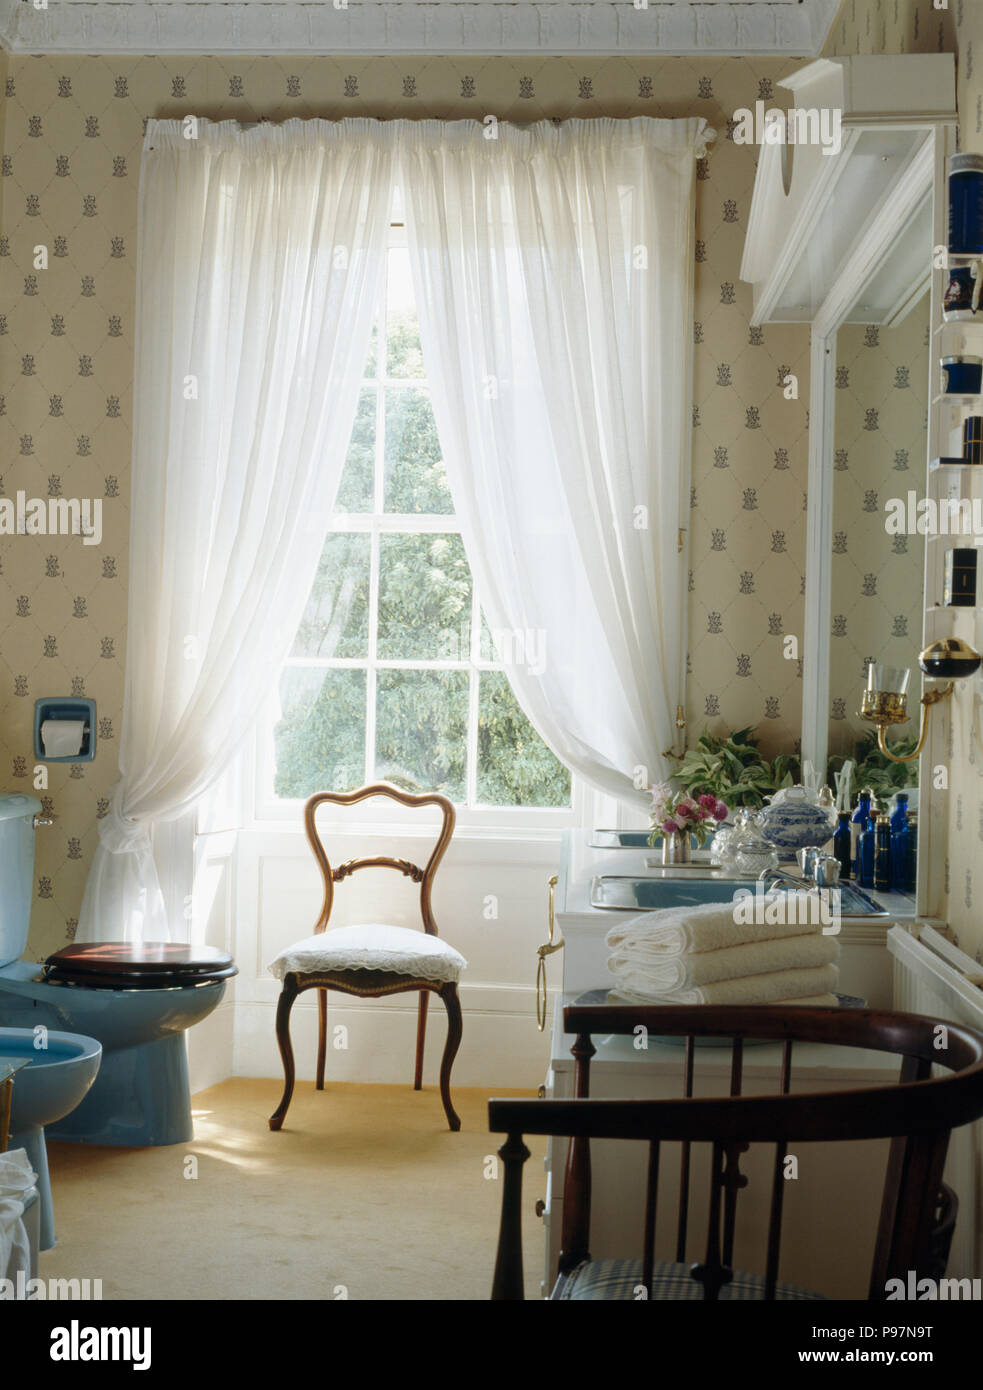 White voile curtains on window in traditional bathroom Stock Photo